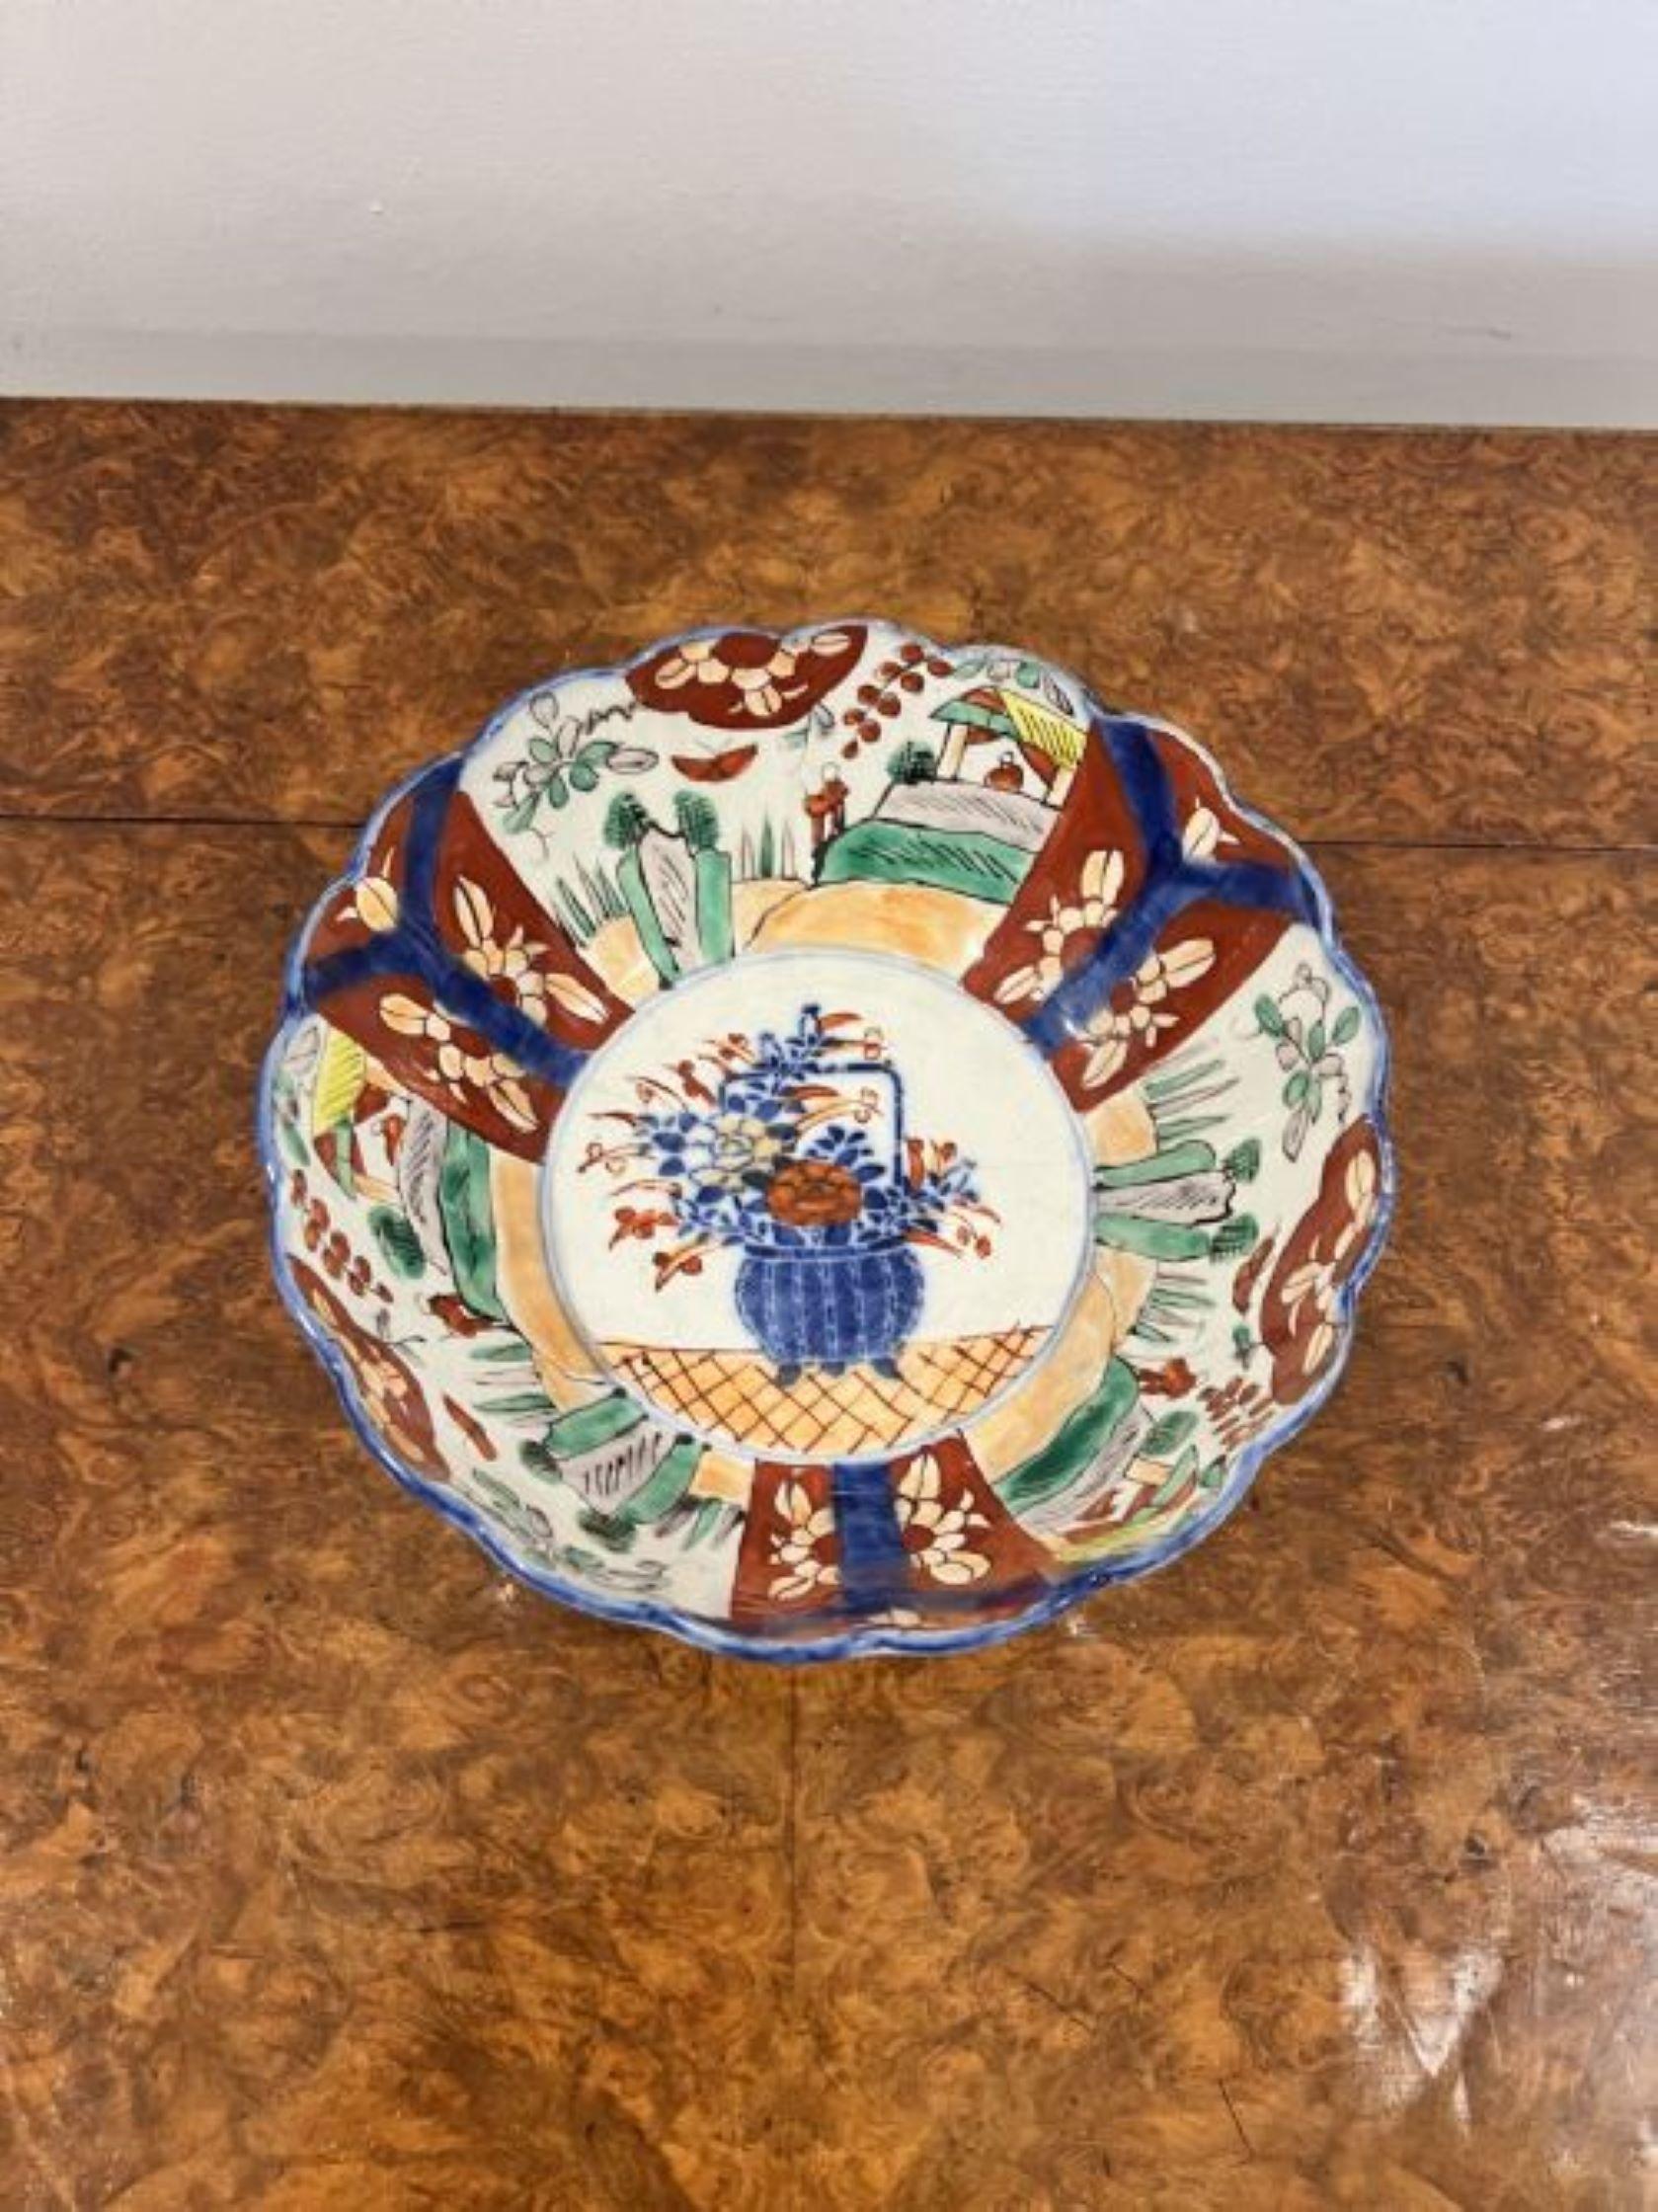 Quality antique Japanese Imari bowl having a scalloped shape edge, to the centre a basket of flowers surrounded by wonderful hand painted panels decorated with people, houses, birds, flowers and leaves in fantastic red, blue, green and white